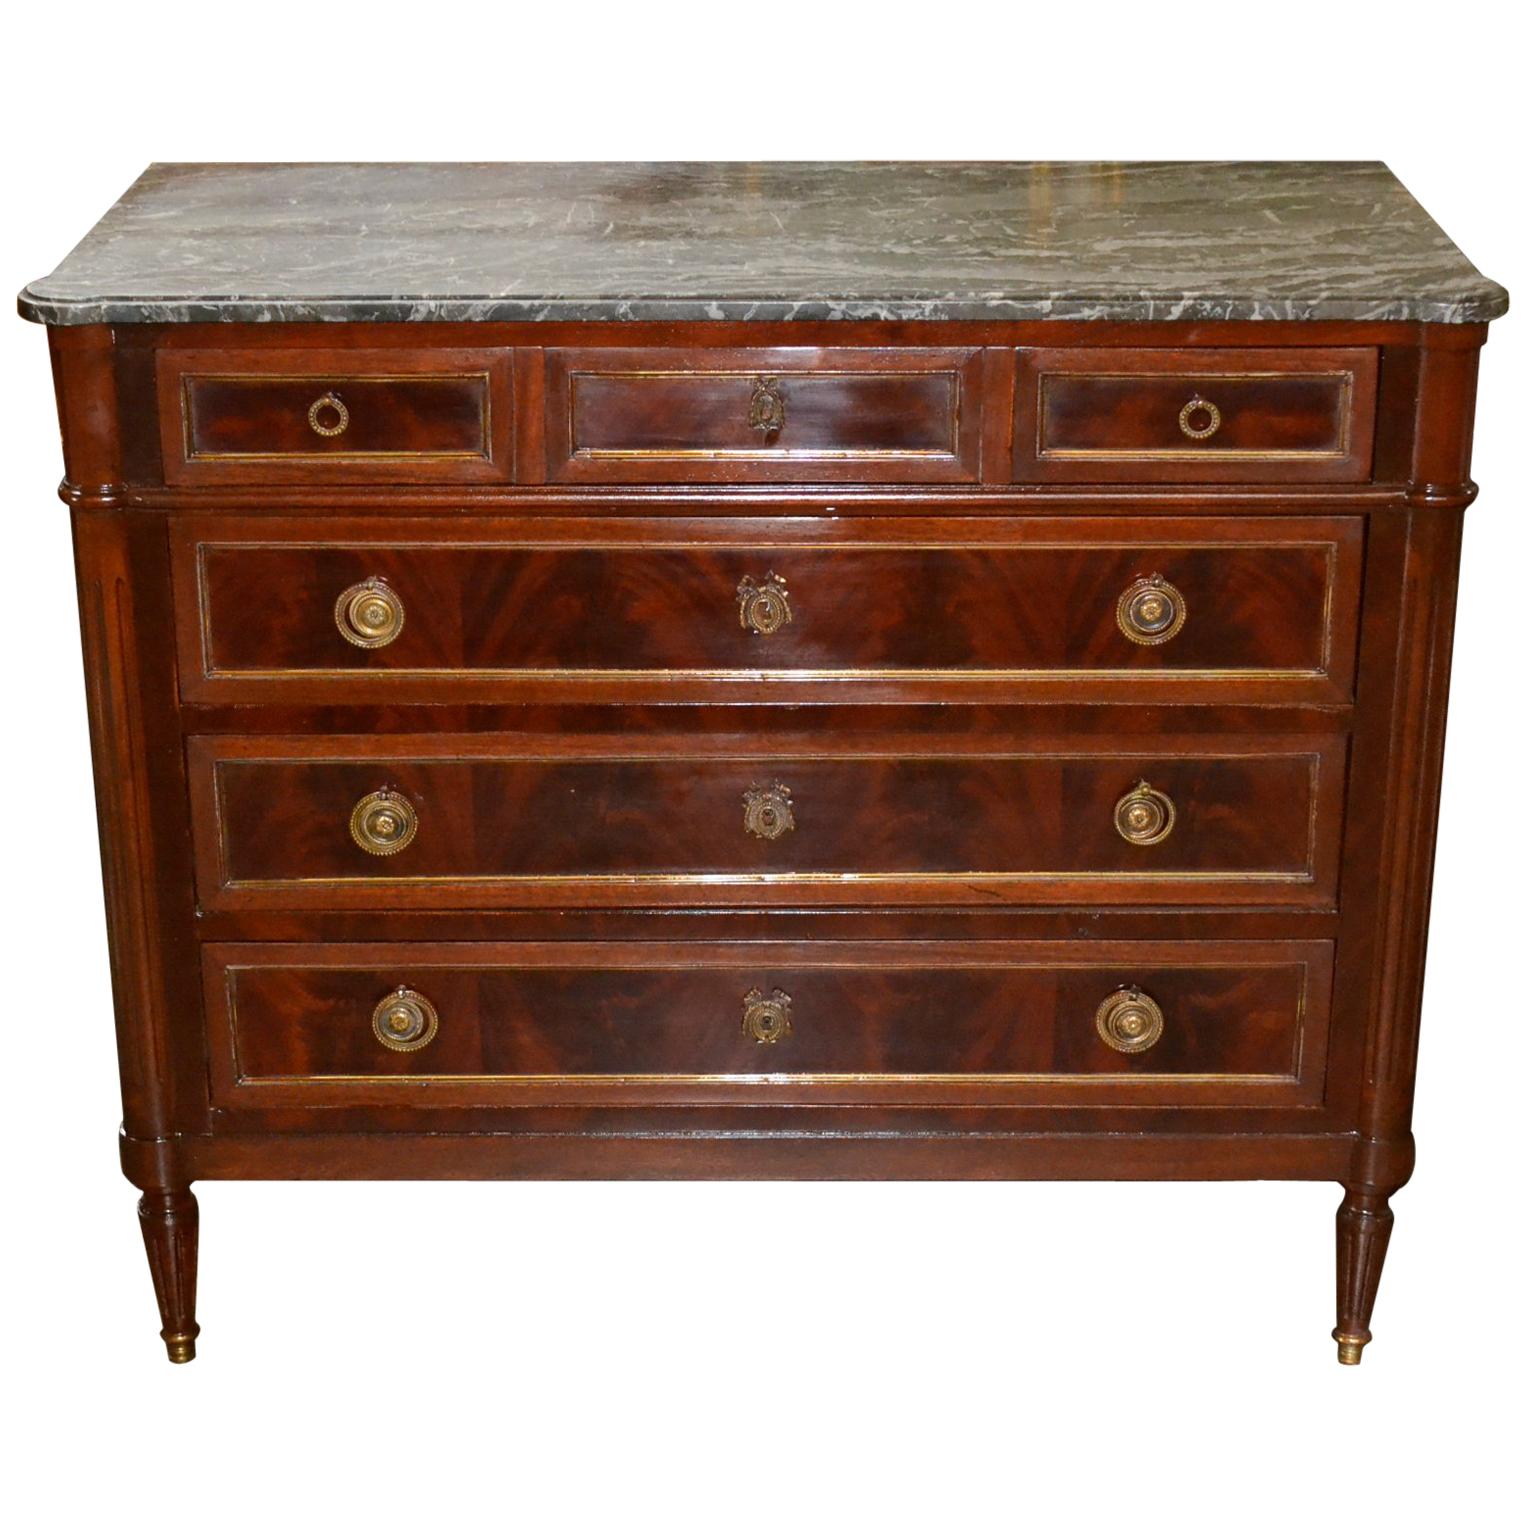 19th Century French Directoire Commode